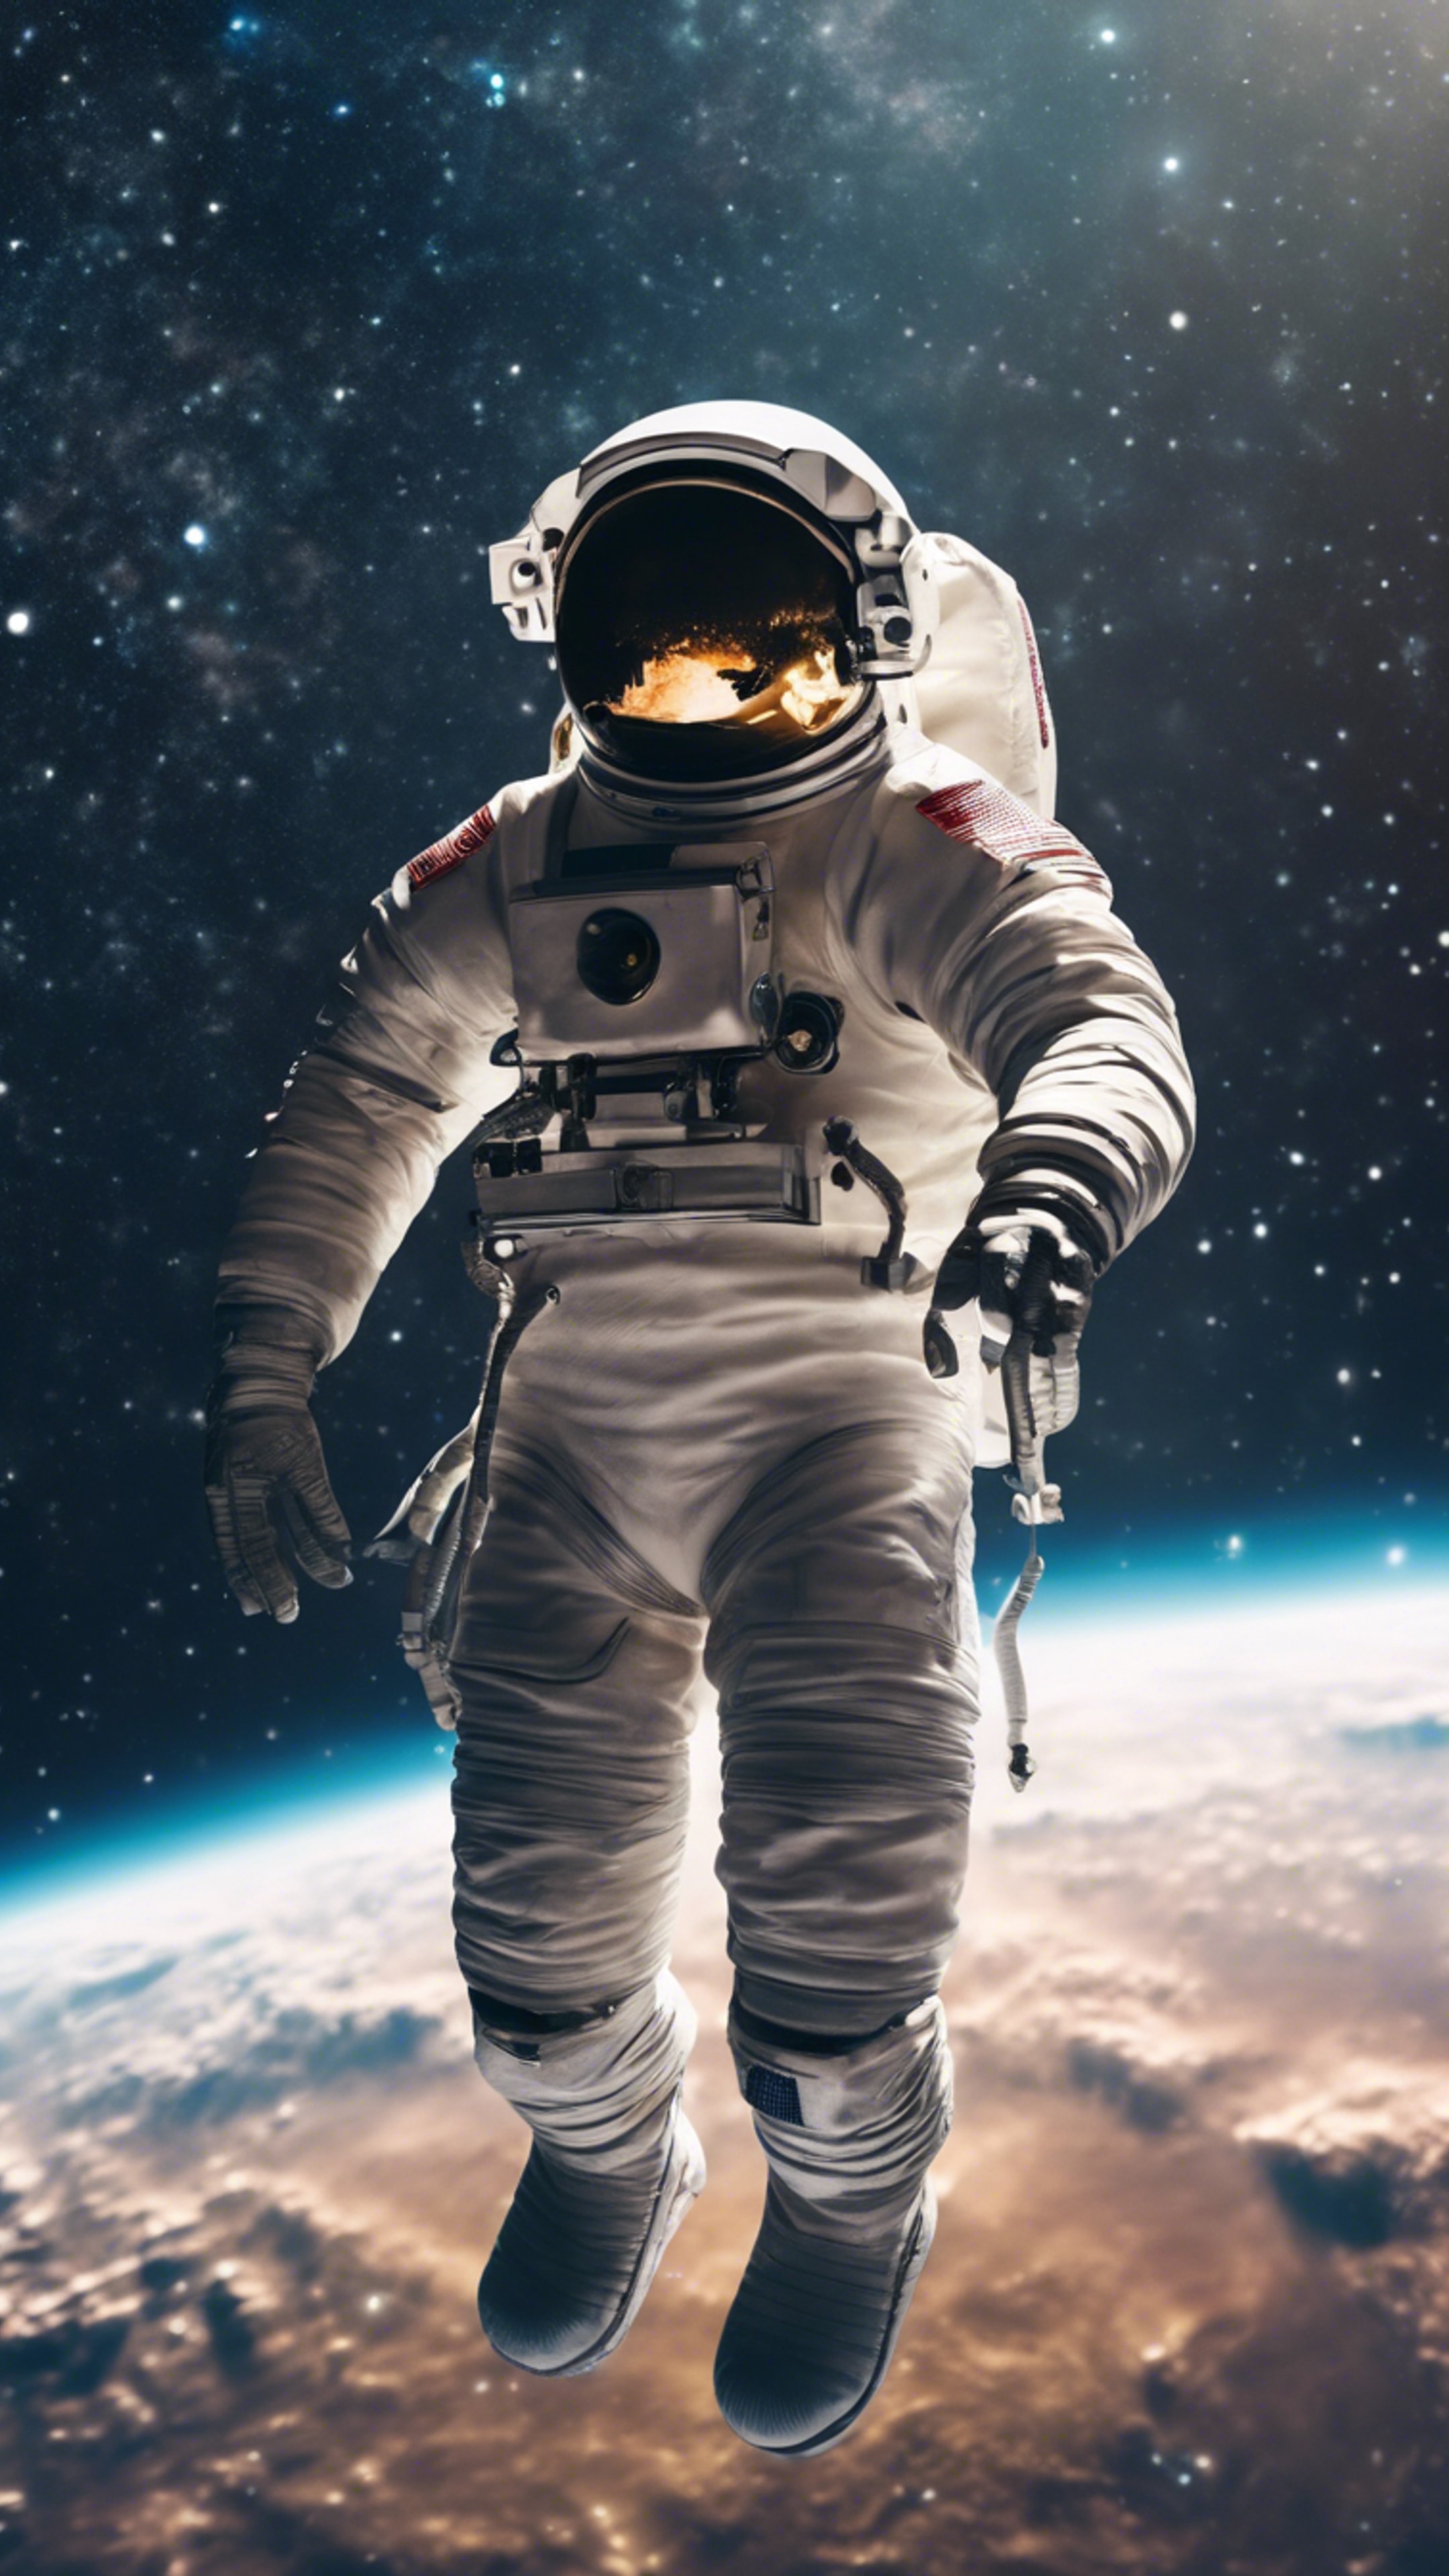 An astronaut floating in the vastness of outer space under an overwhelmingly starry night. Wallpaper[2871c9401798481f9516]